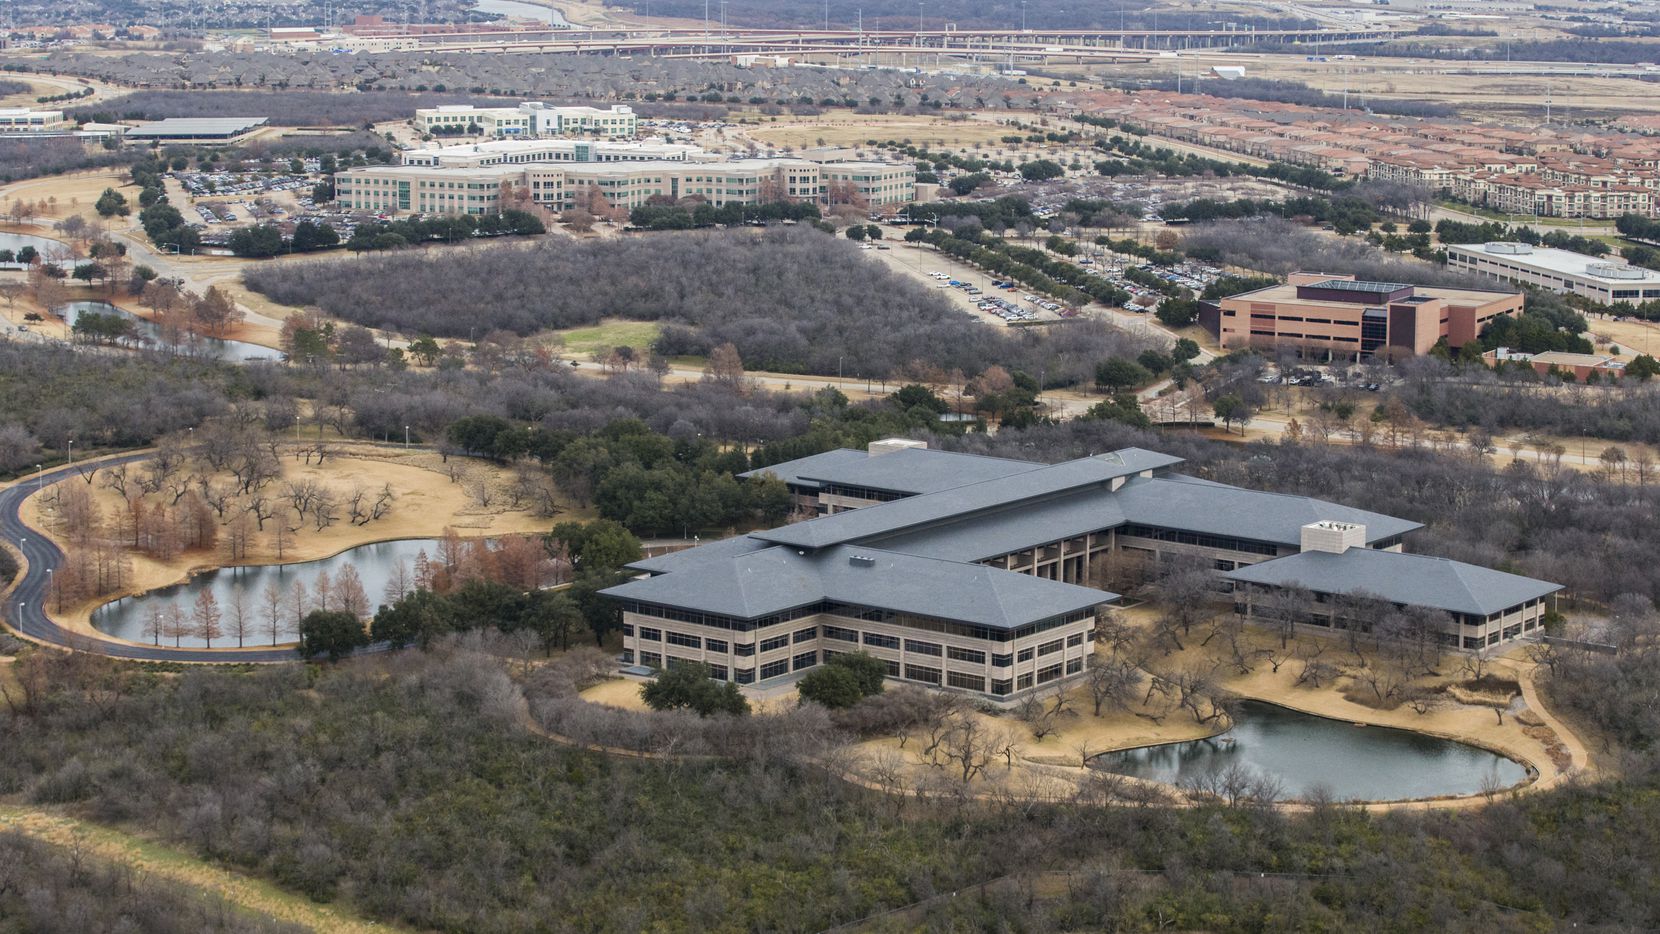 Irving ranked No. 19 among the most "livable cities" in the country, according to a study by...